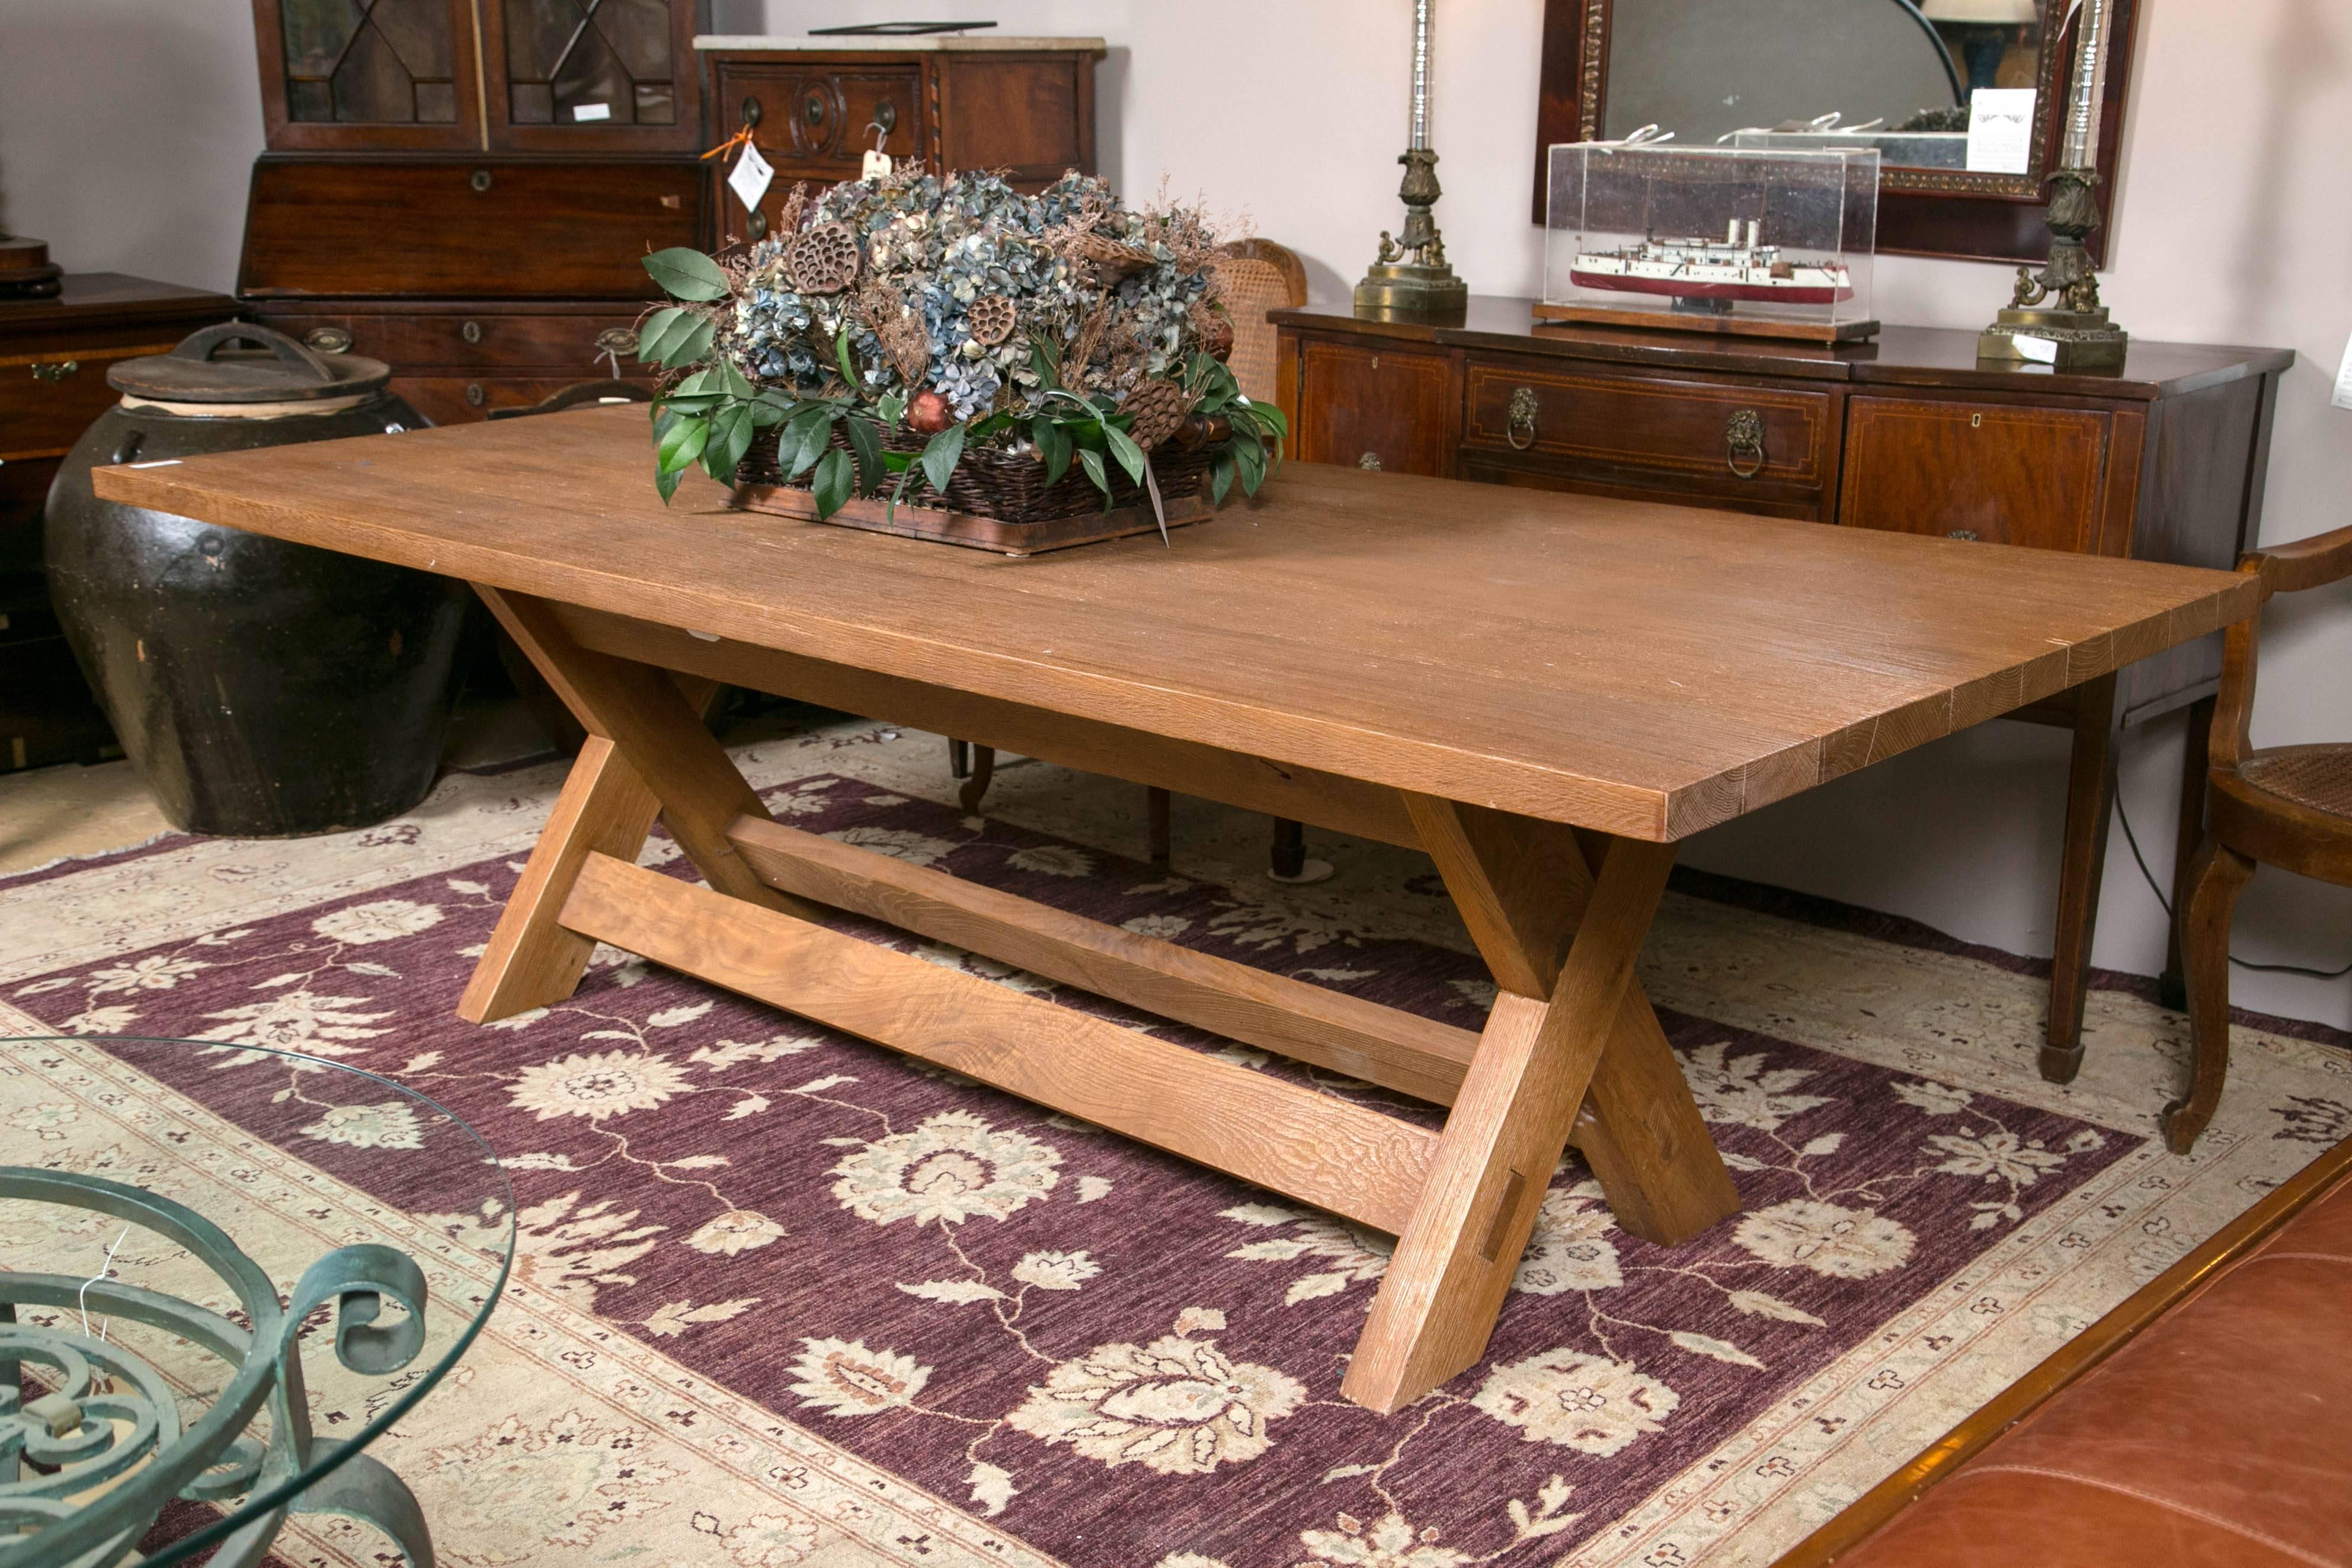 Desert modern dining table by Ralph Lauren. Hand fitted mortise and tenon Joints. Fabulous mix of modern and traditional. A rustic hewned wood X-form farm table. A soft natural organic modern/traditional aesthetic. Seats eight-ten comfortably. Great